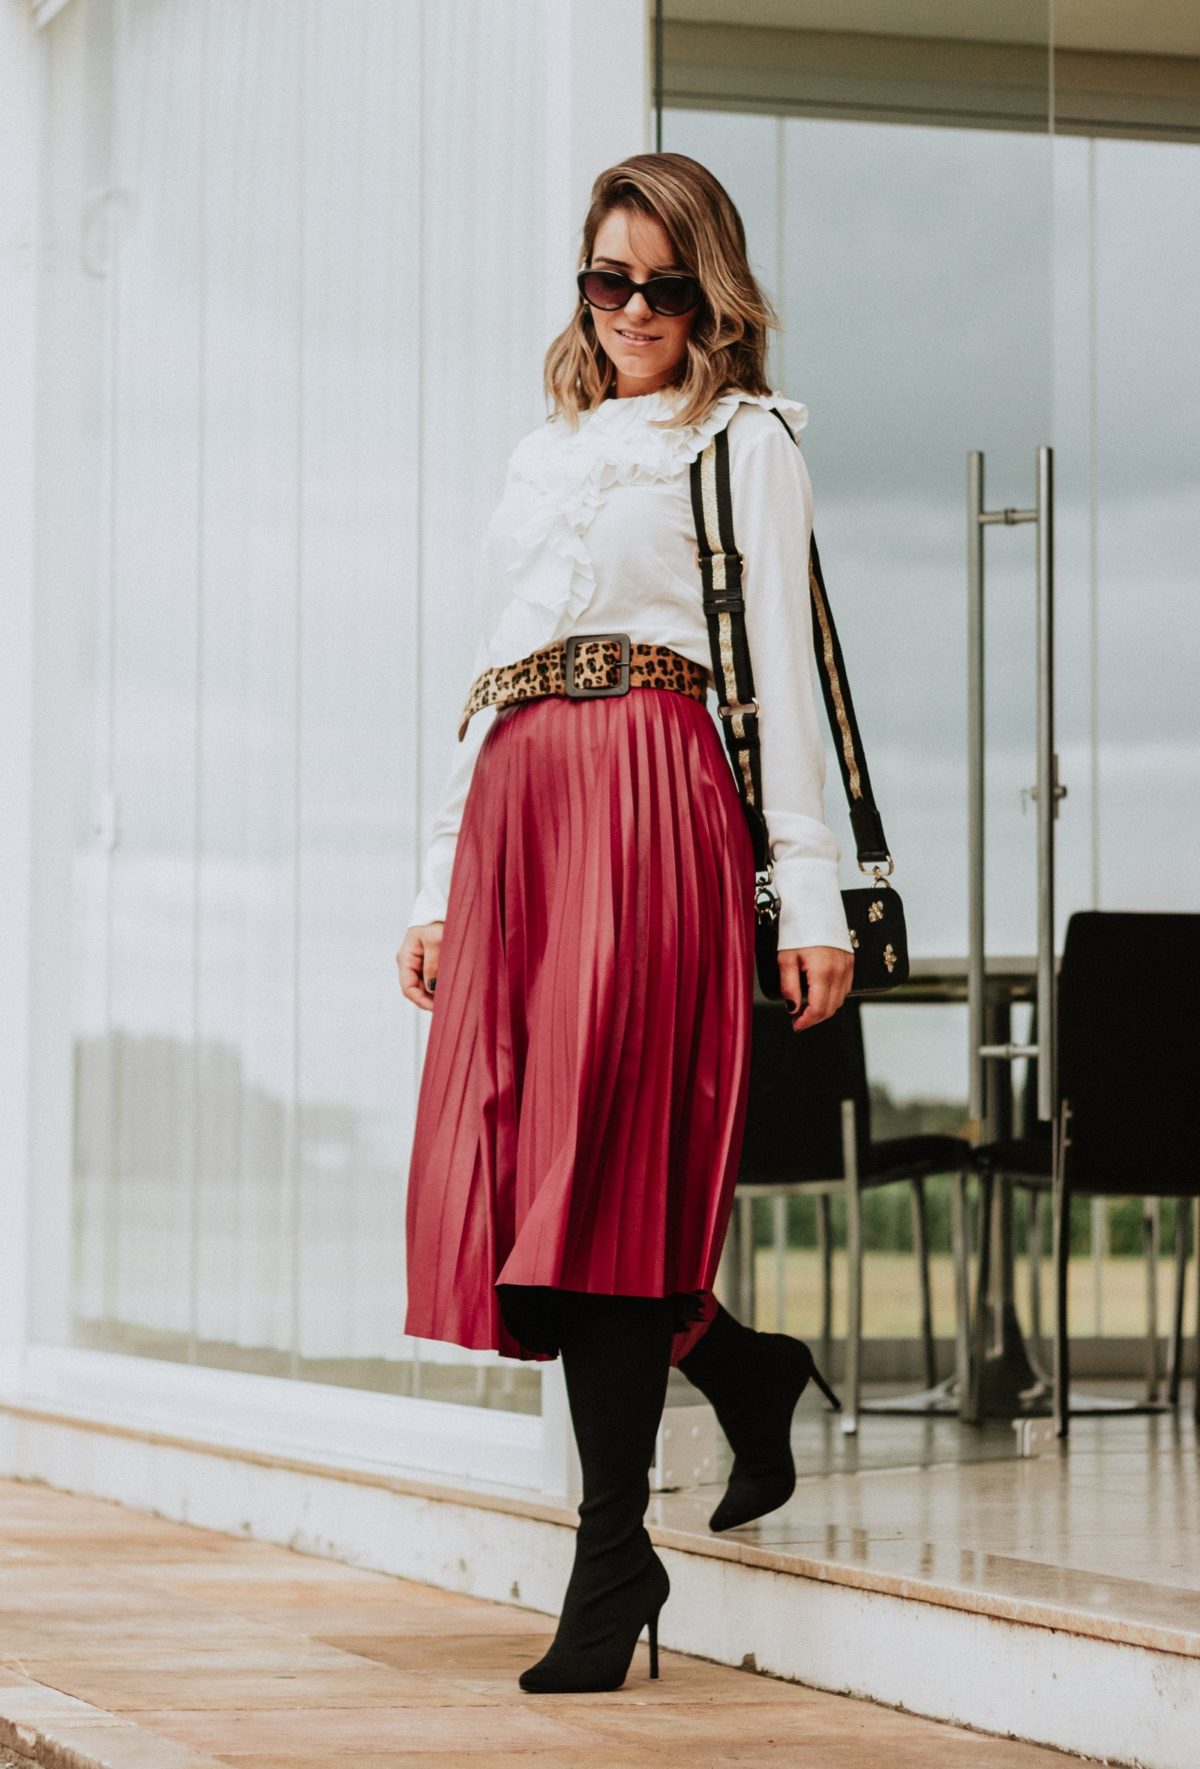 pleated skirt outfit winter with boots and belt hourglass figure